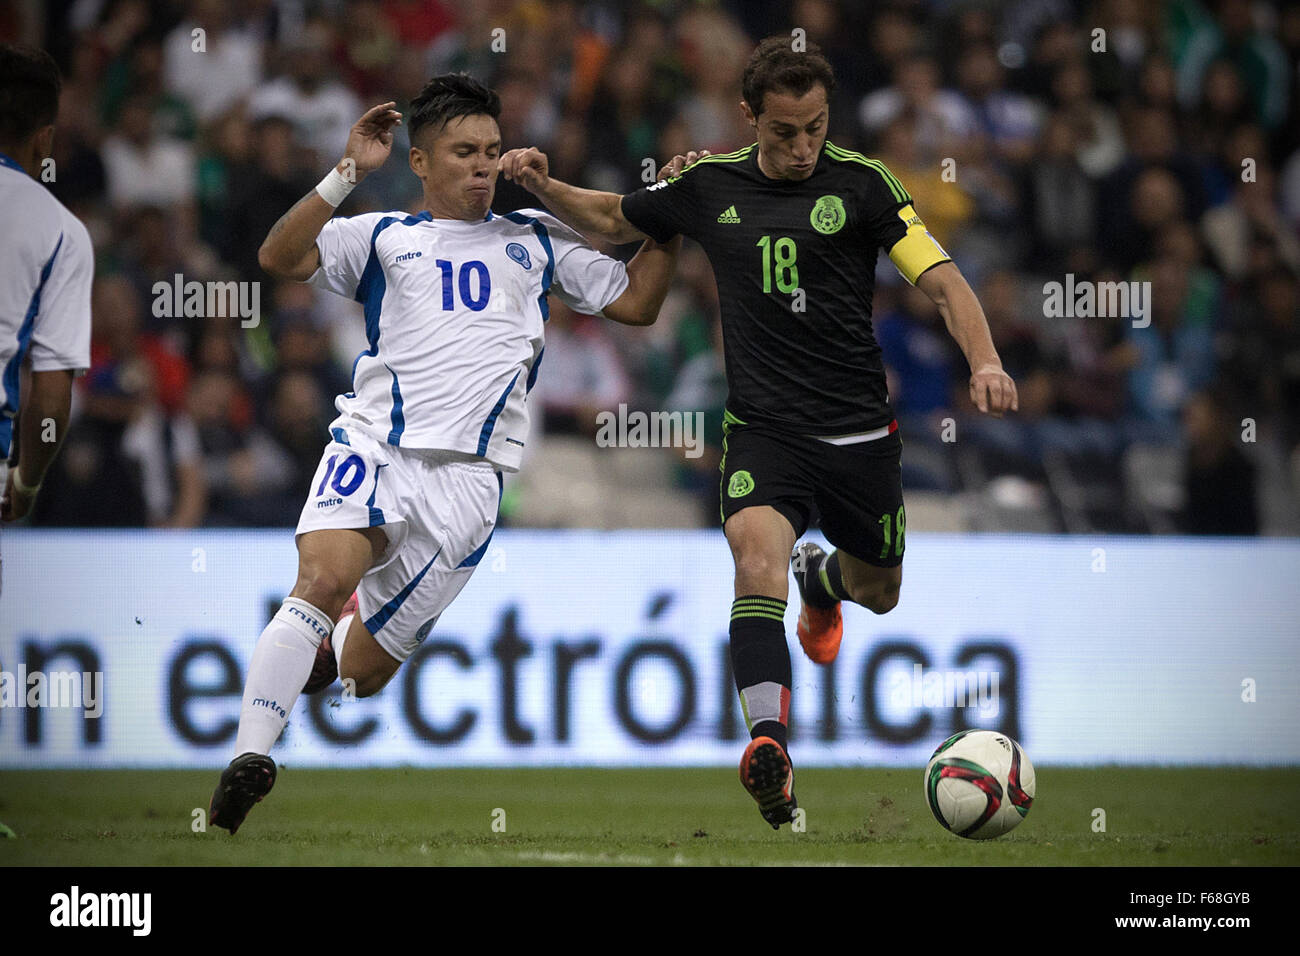 Mexico City, Mexico. 13th Nov, 2015. Andres Guardado (R) of Mexico vies with Jaime Alas of El Salvador during their 2018 Russia World Cup qualifying match at Azteca Stadium in Mexico City, capital of Mexico, on Nov. 13, 2015. Mexico won 3-0. Credit:  Alejandro Ayala/Xinhua/Alamy Live News Stock Photo